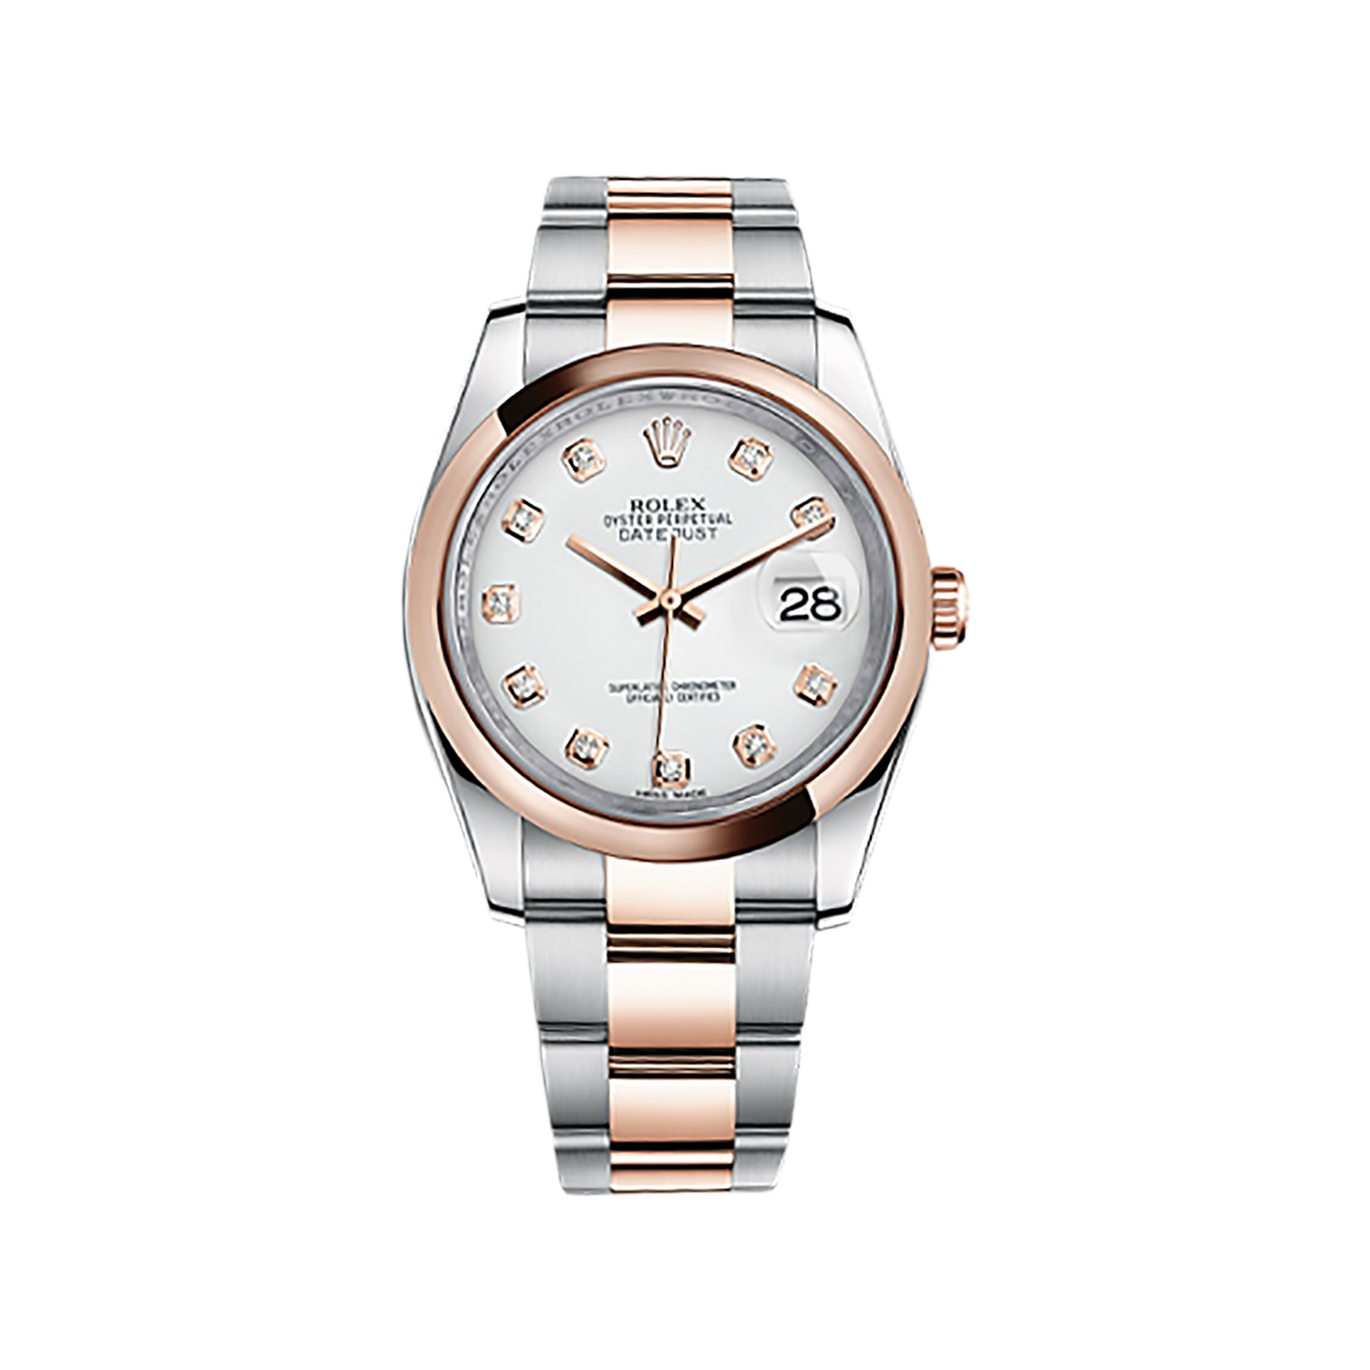 Datejust 36 116201 Rose Gold & Stainless Steel Watch (White Set with Diamonds)